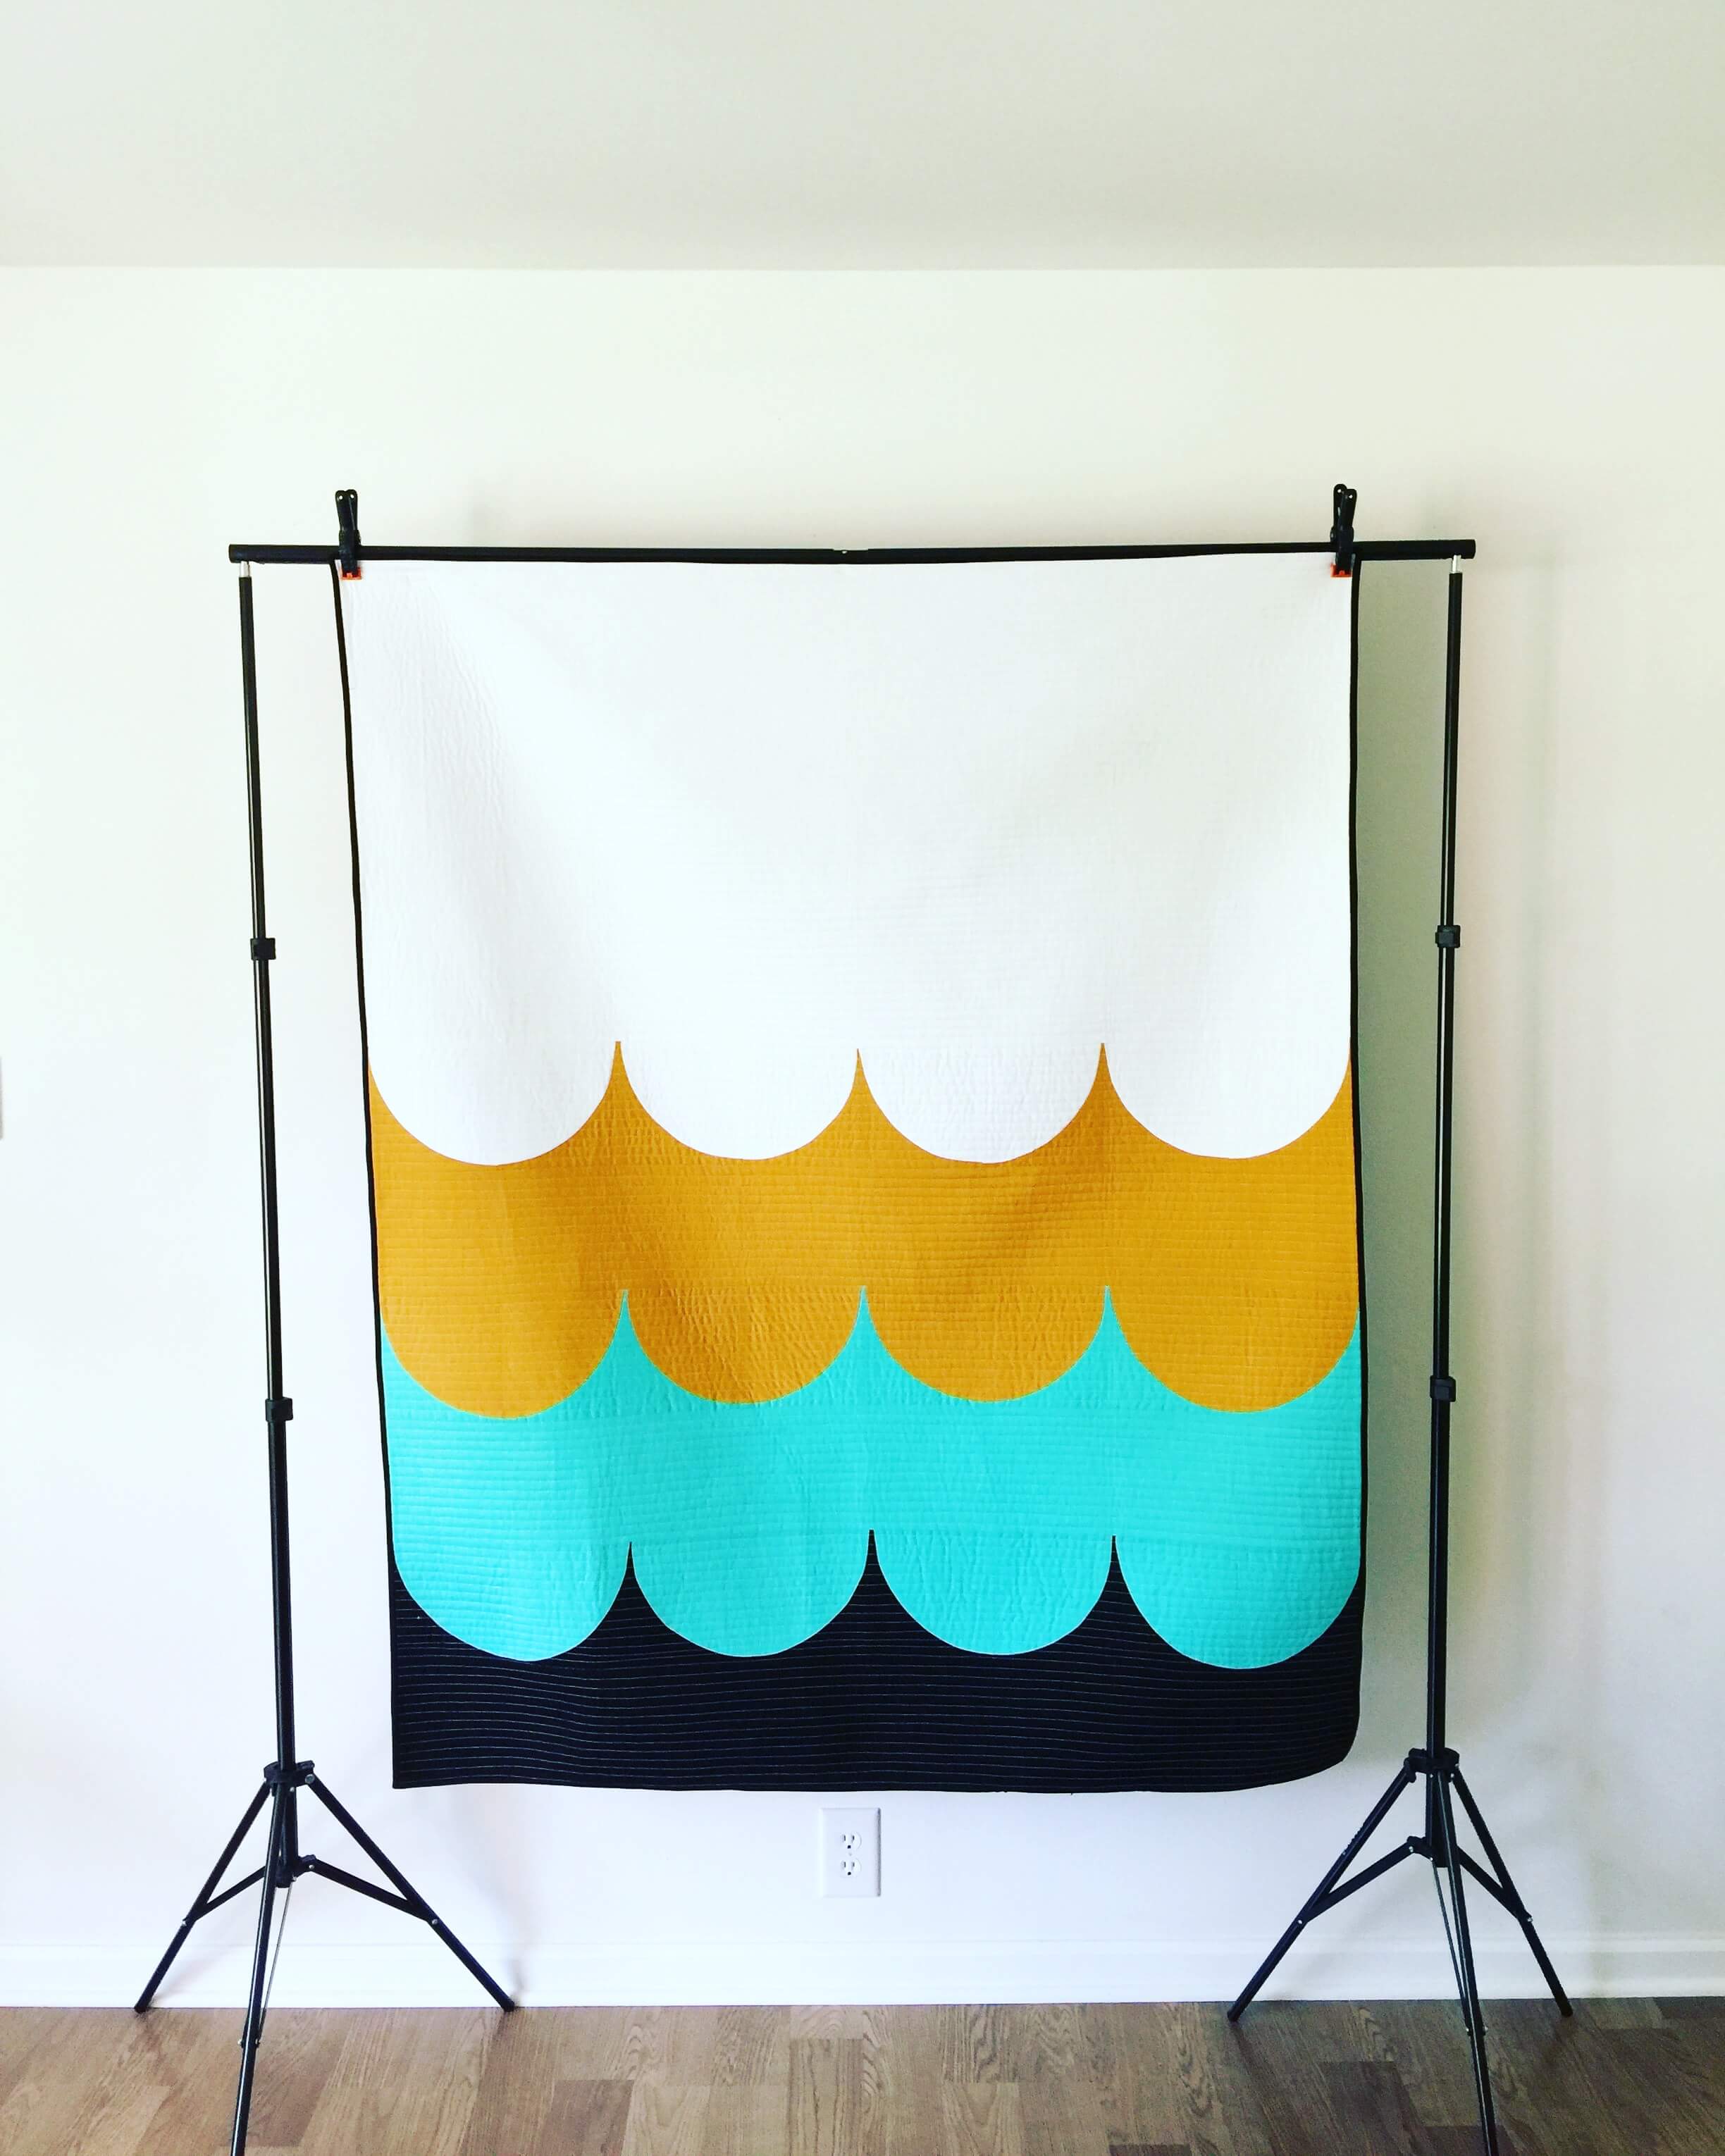 Scallop Quilt Printed Pattern